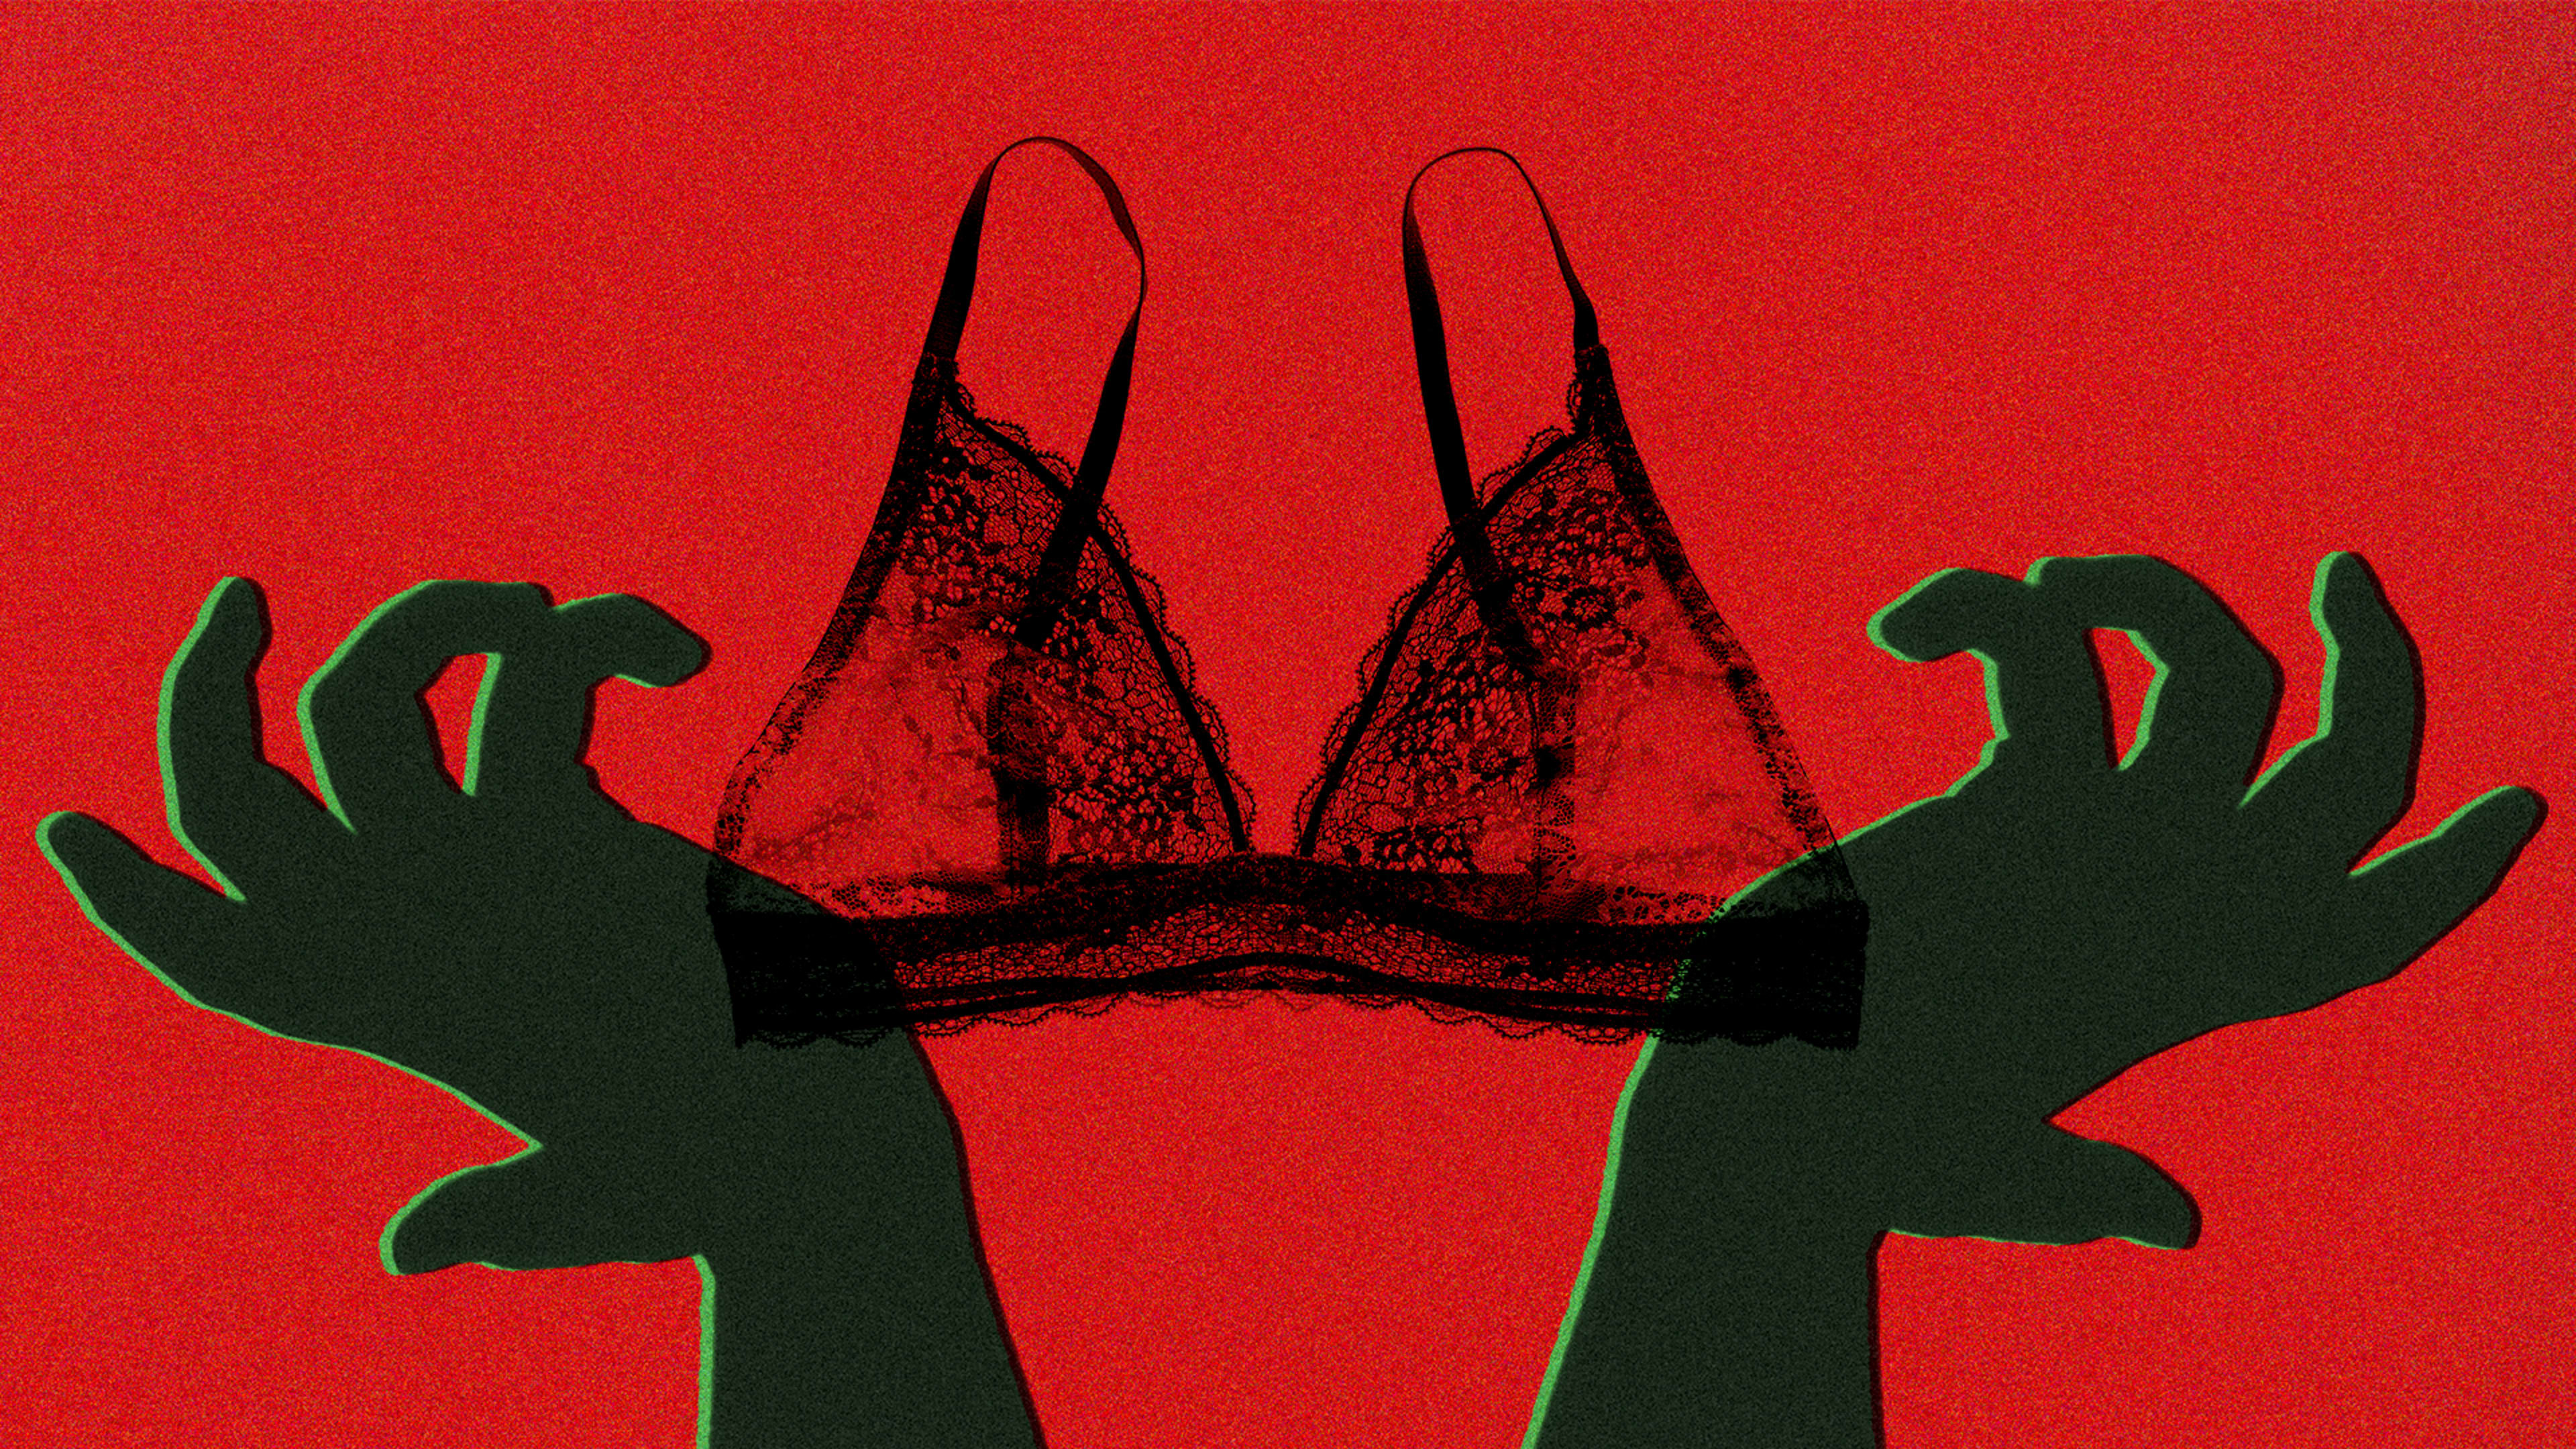 An ex-Victoria’s Secret executive thought 2019 was the right time to launch sexy lingerie